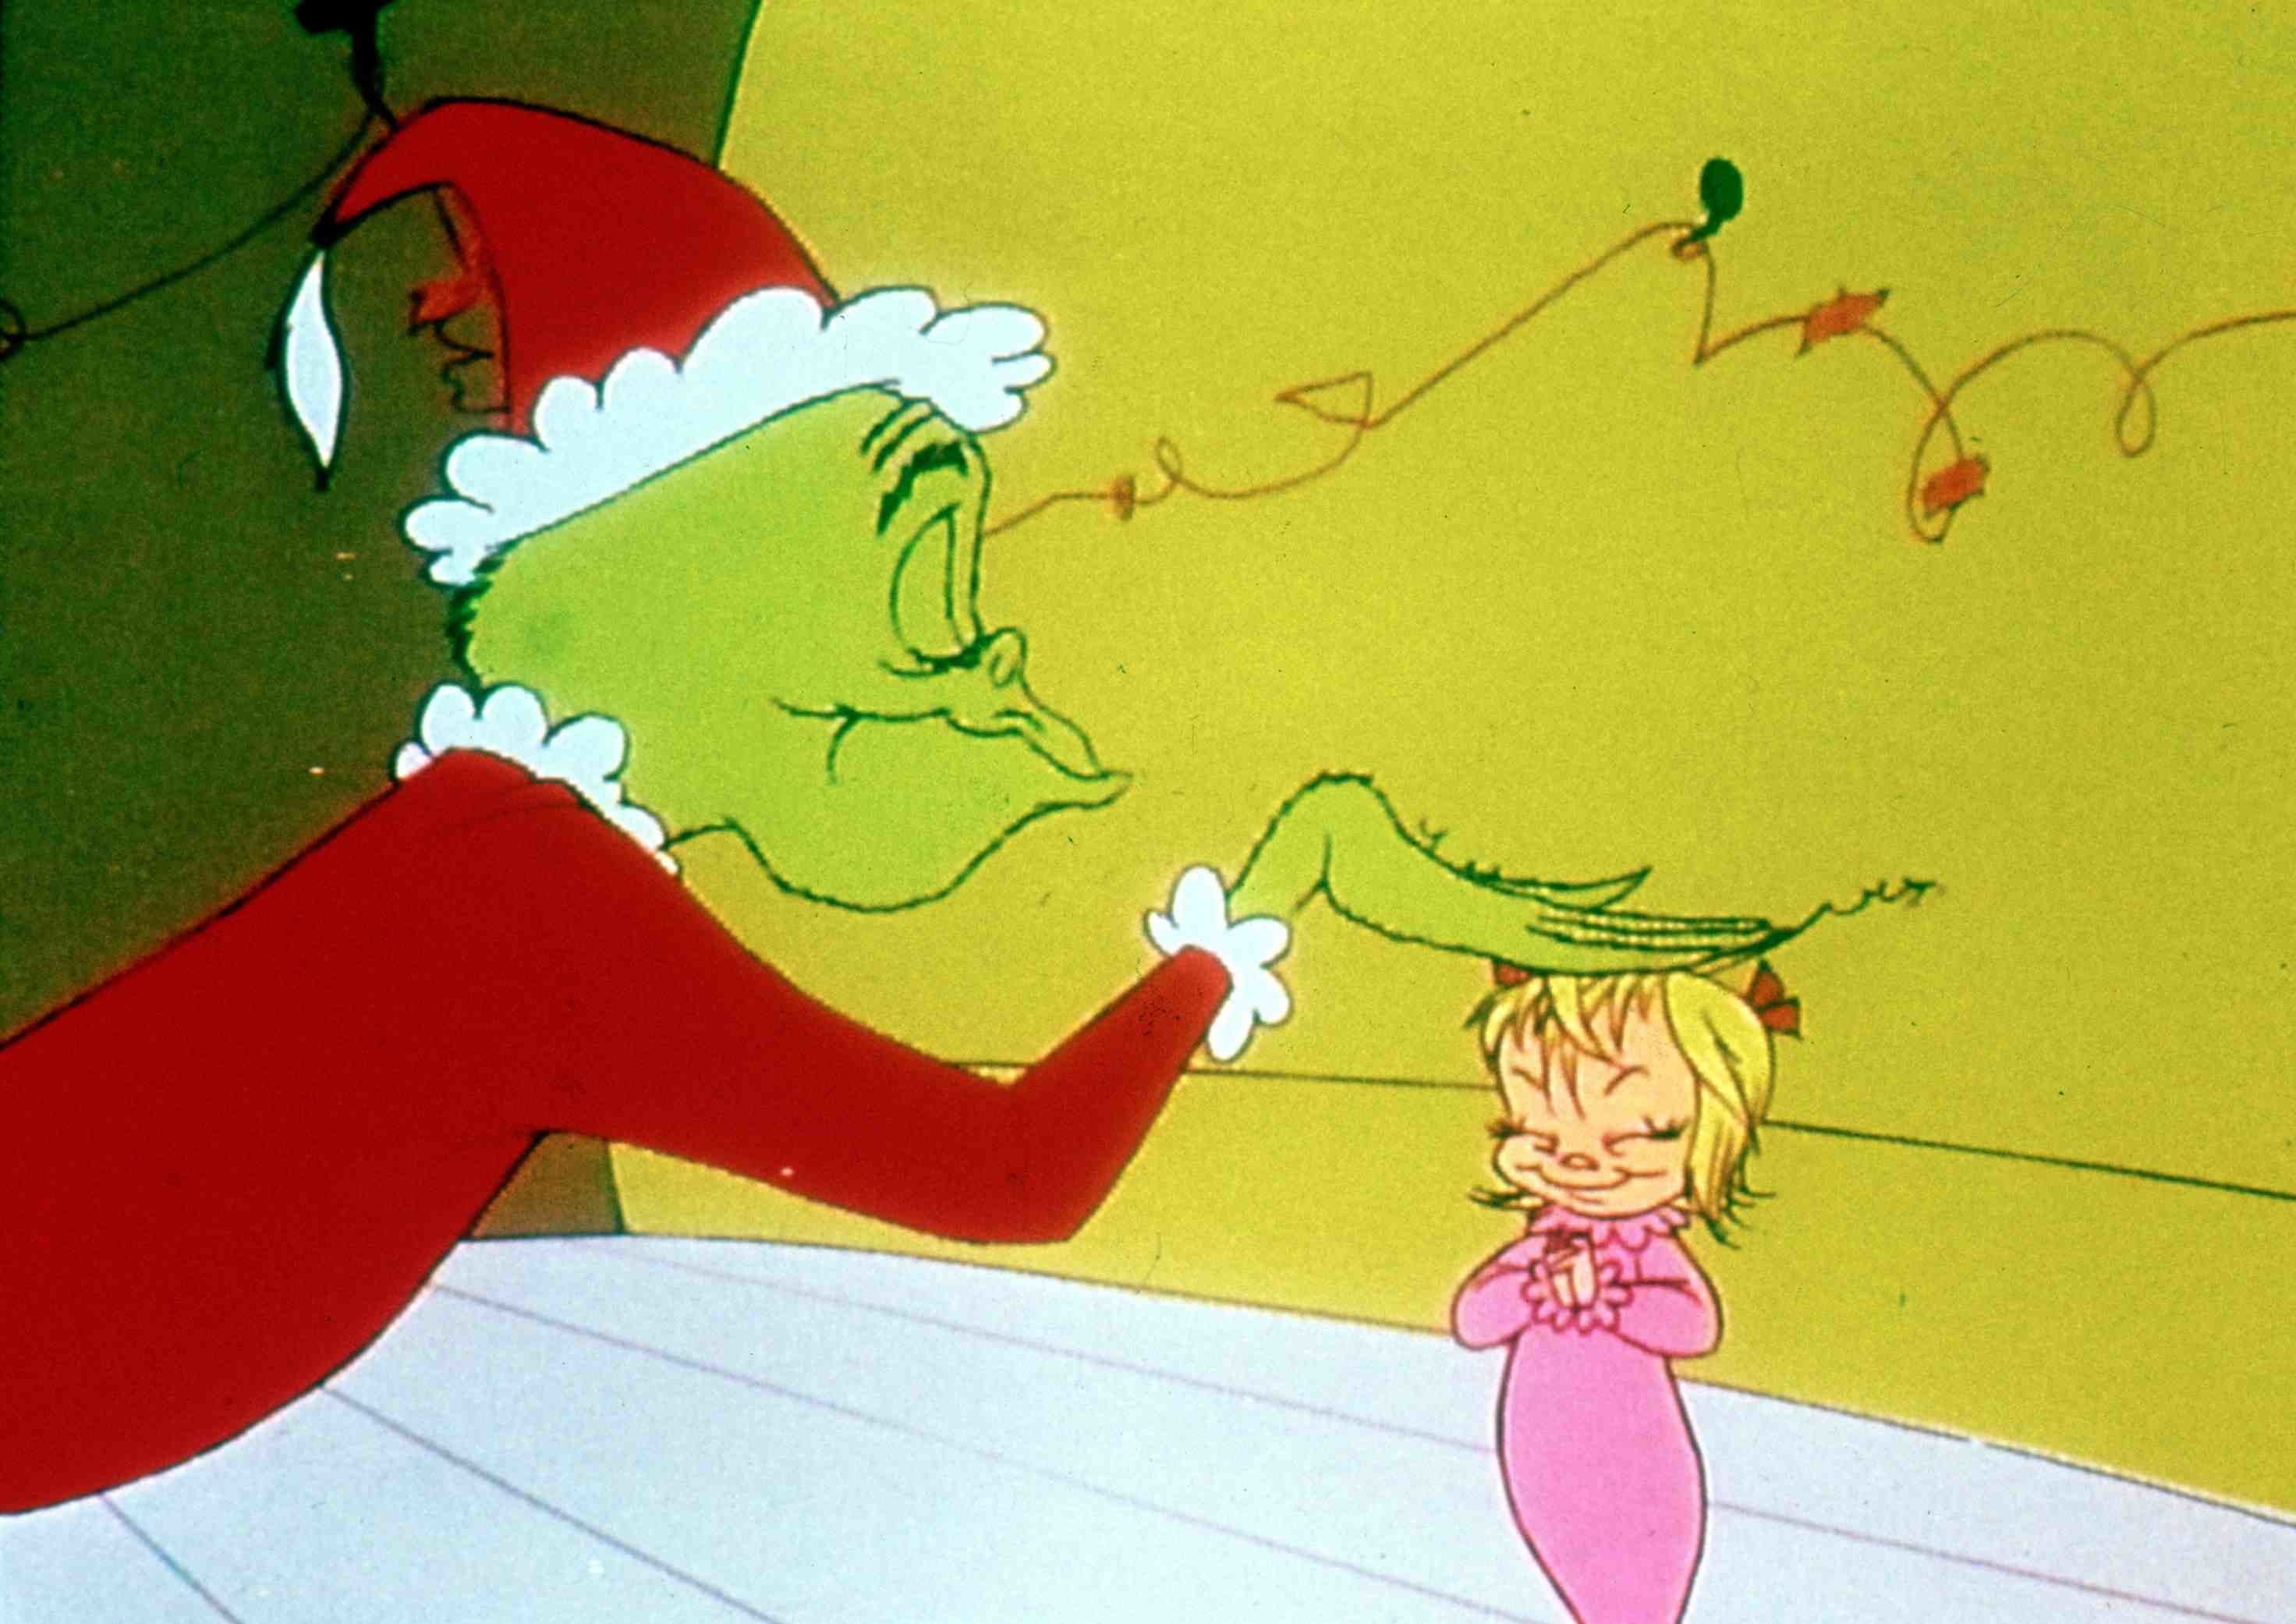 Unique How the Grinch Stole Christmas Wallpaper Free. Best Christmas Quotes 2018, Funny & Inspirational Holiday Sayings